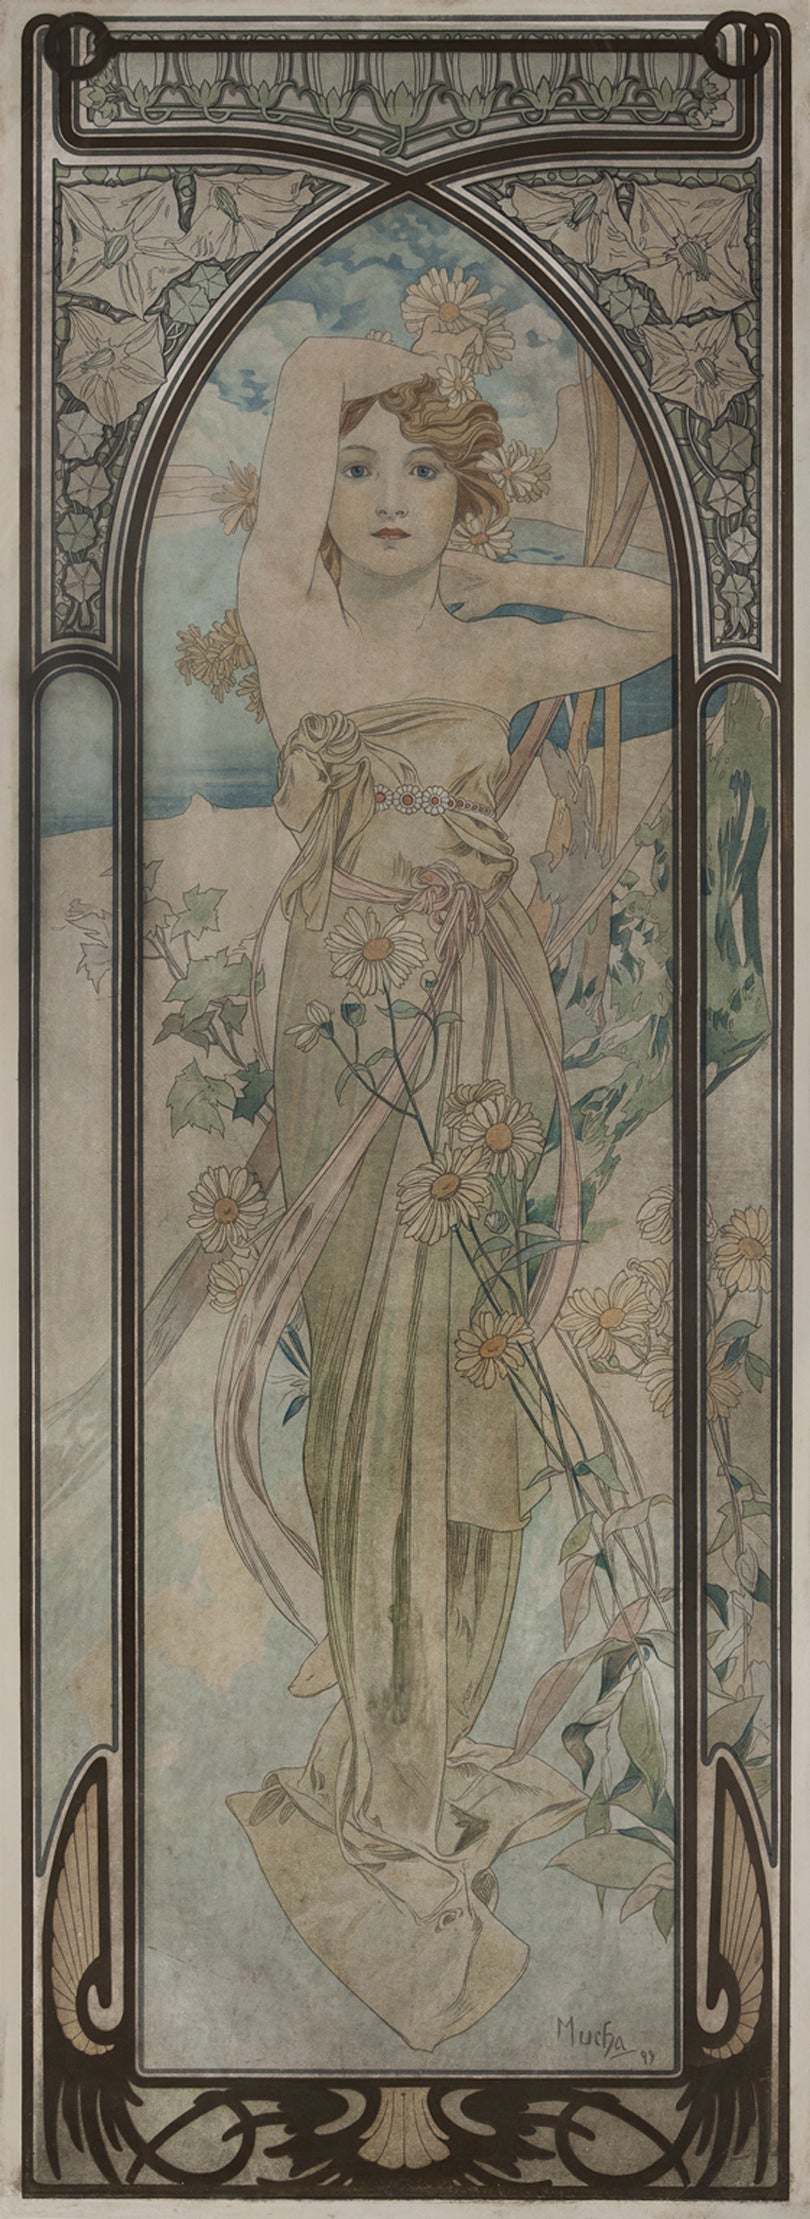 This series of color lithographs was produced in 1899 by Czech artist Alfons Maria Mucha. Each panel focuses on a woman in a natural setting, reflecting her mood and time of day. A decorative frame exemplary of the Art Nouveau style outlines the